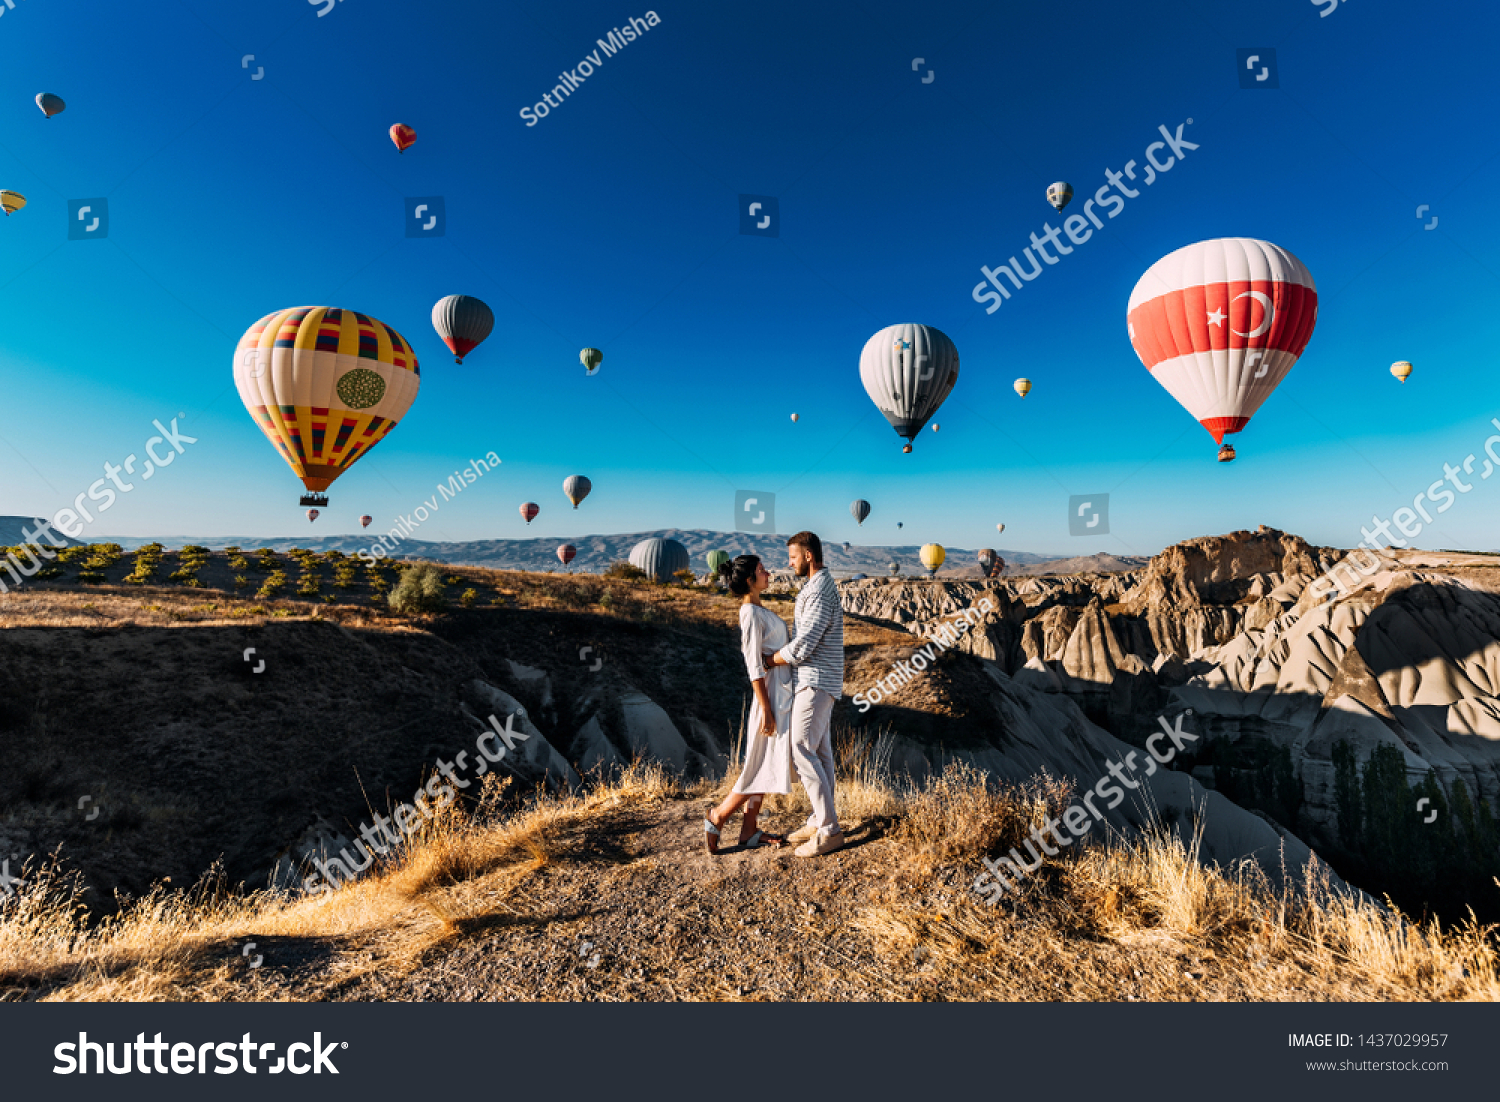 Lovers travel to Turkey. The man proposed to the girl. Family trip to Turkey. Couple at the balloon festival. Honeymoon trip. Couple travels the world. The Landscapes Of Cappadocia #1437029957